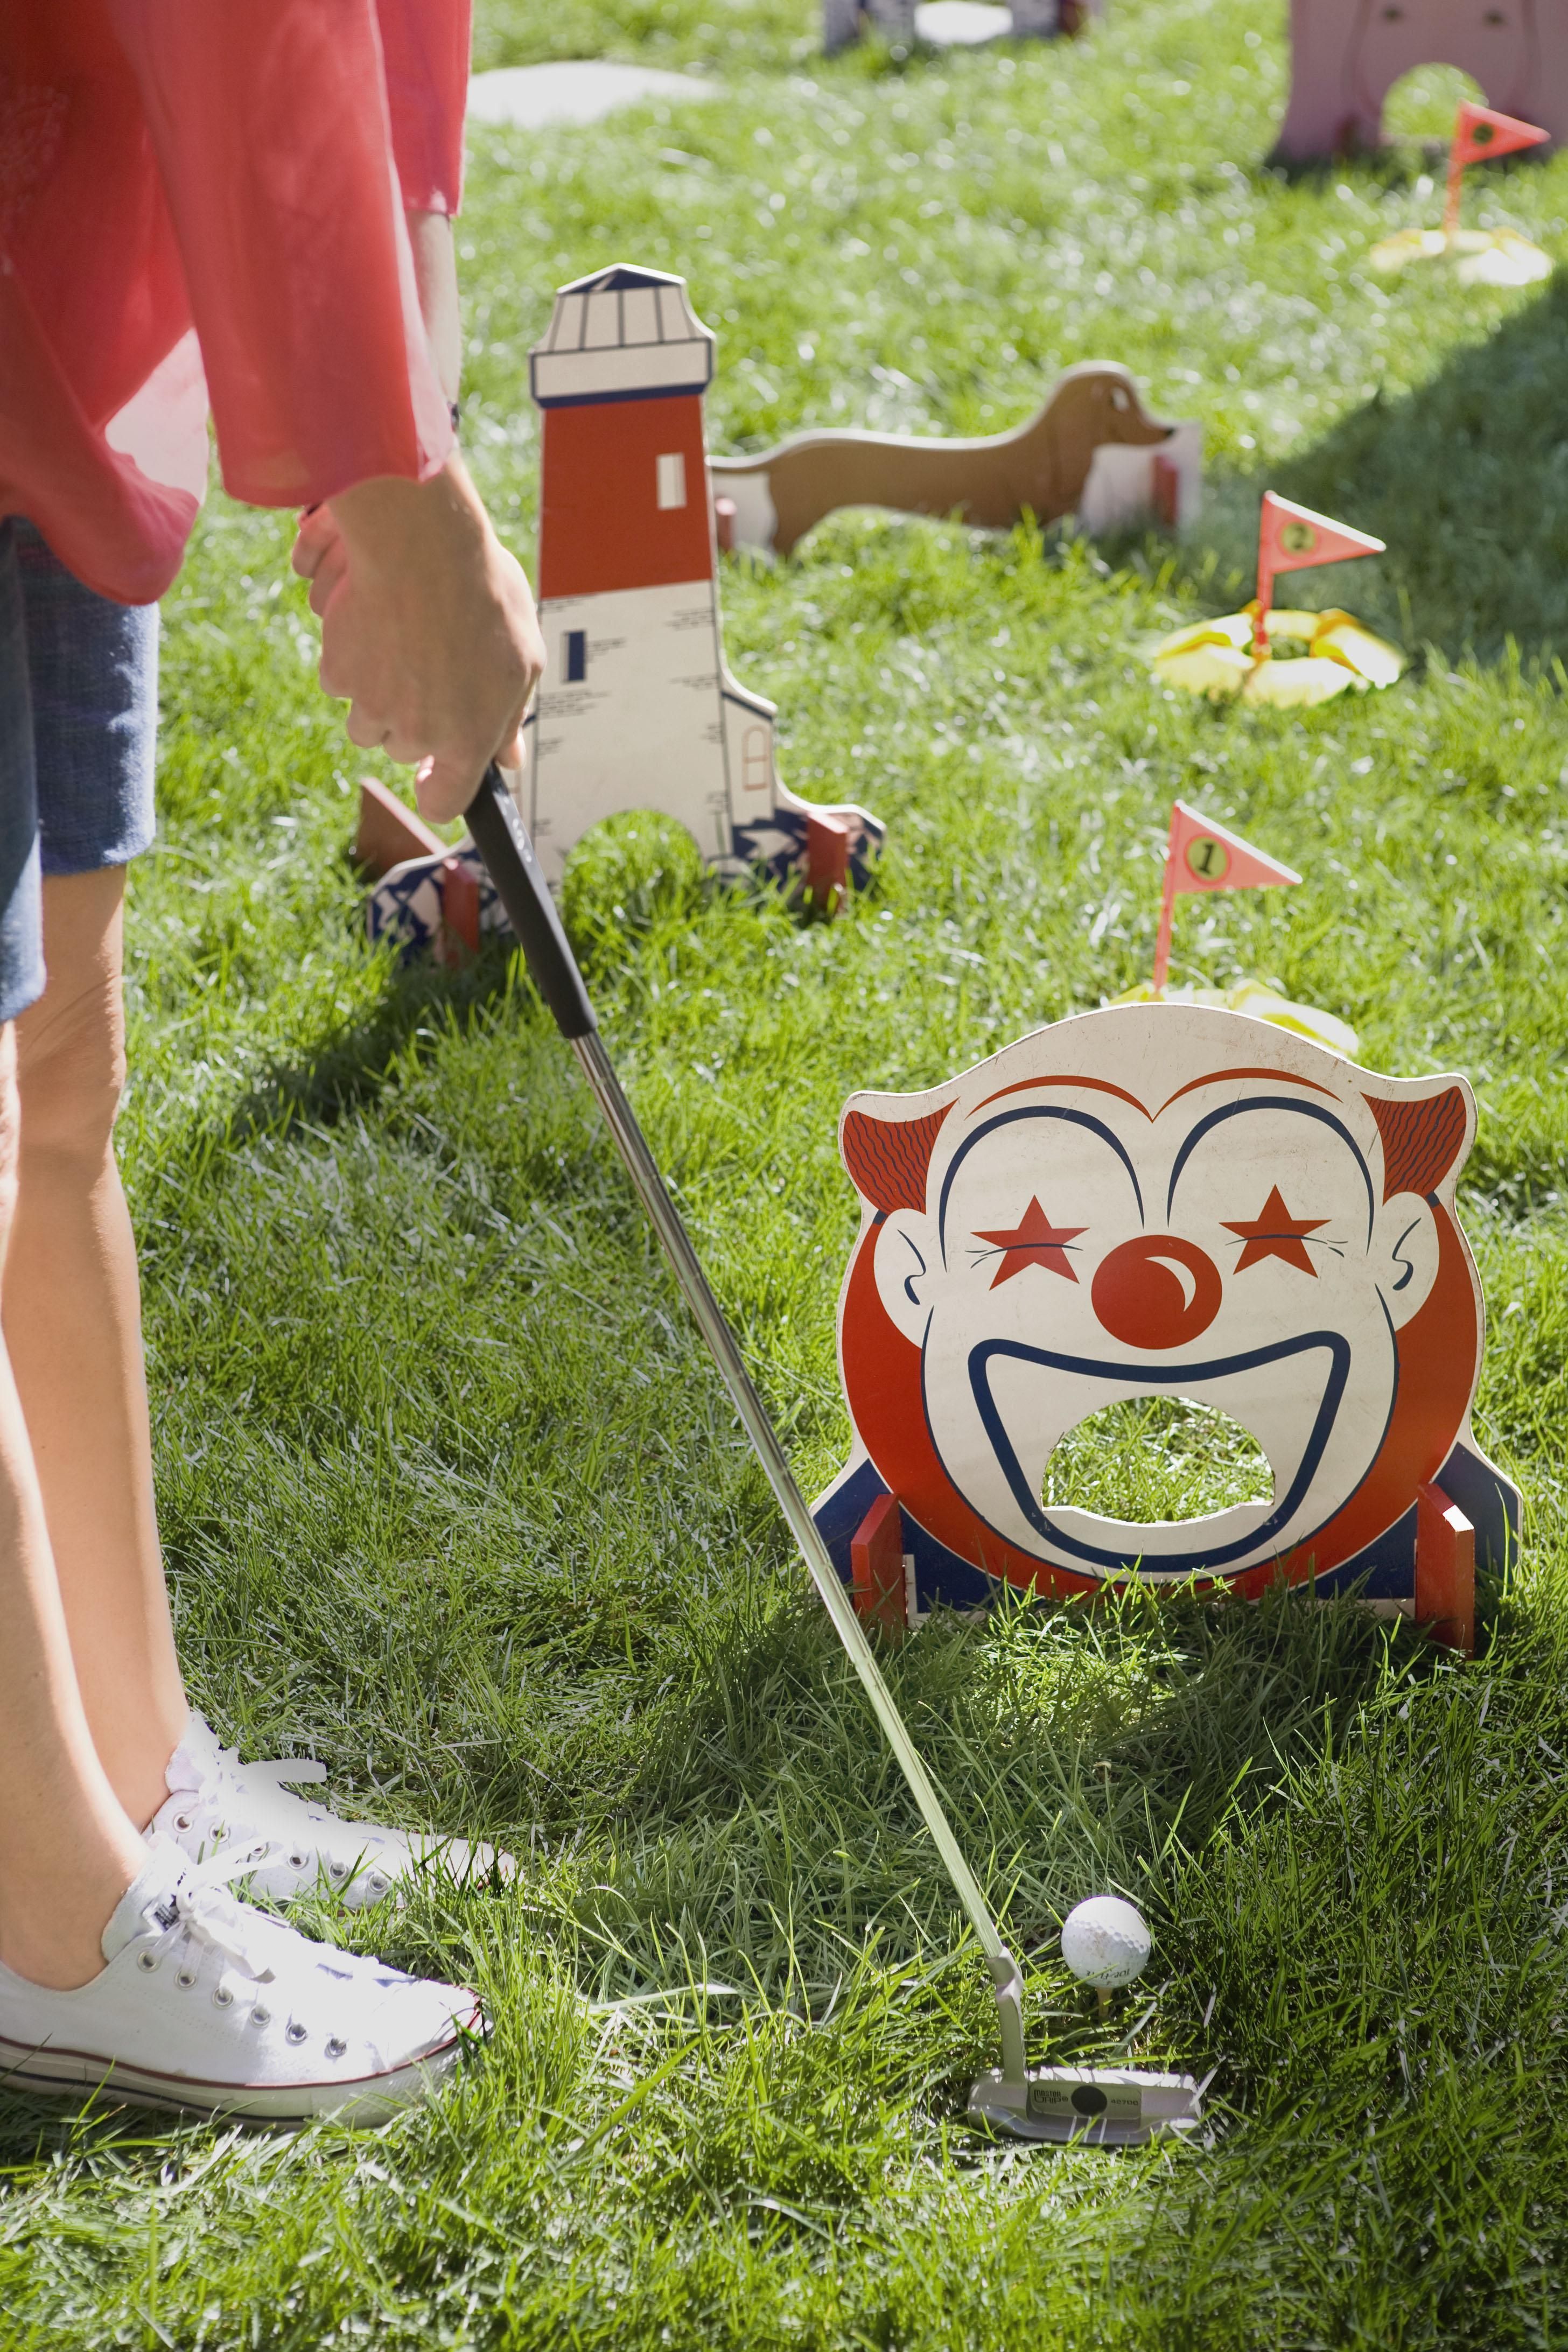 15 Fun Games to Play Outside - C.R.A.F.T.